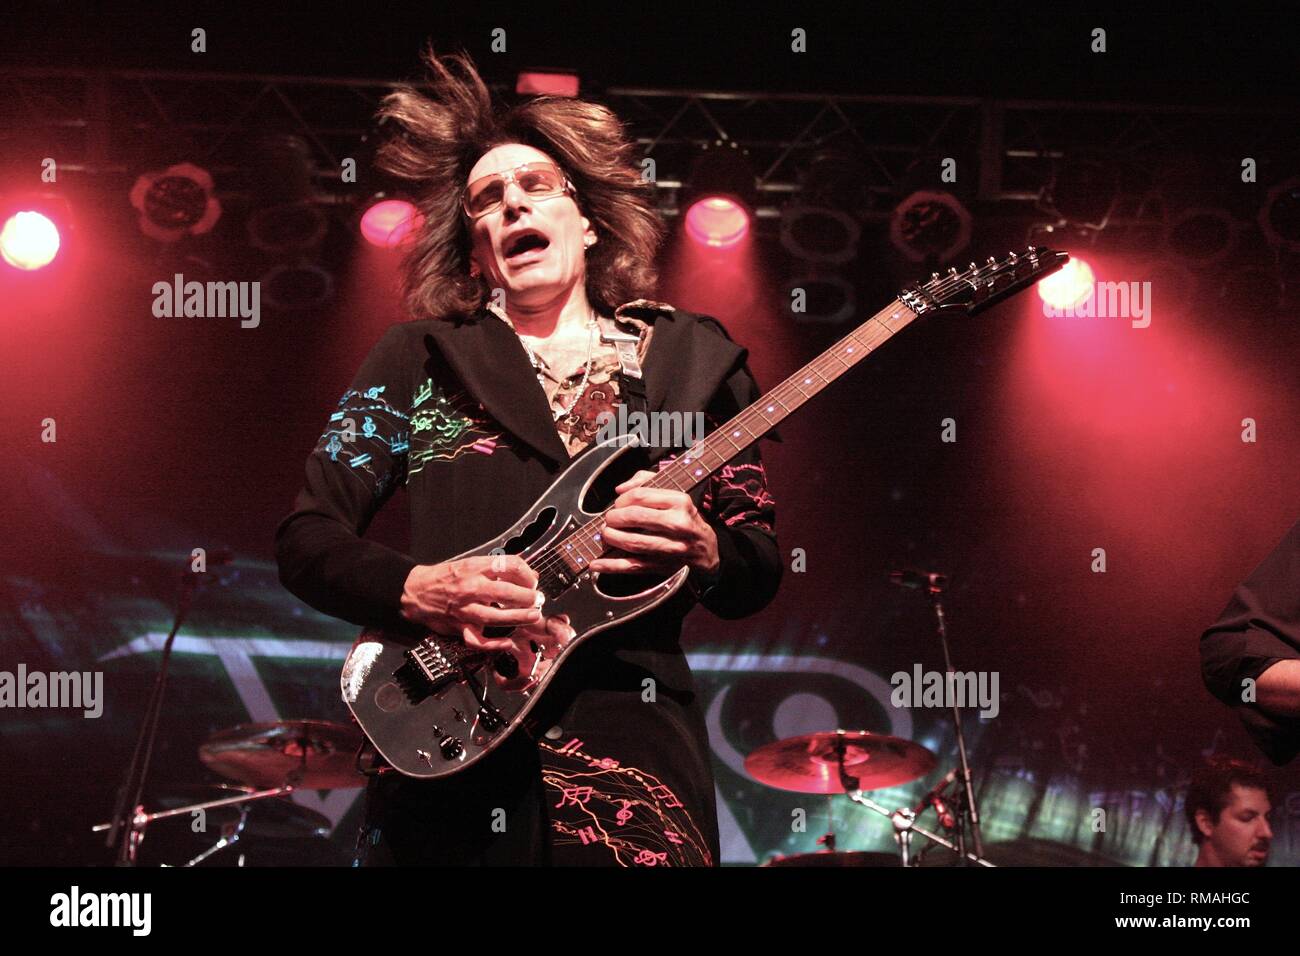 Instrumental rock guitarist, songwriter, vocalist, producer, and actor Steve  Vai is shown performing on stage during a "live" concert appearance Stock  Photo - Alamy